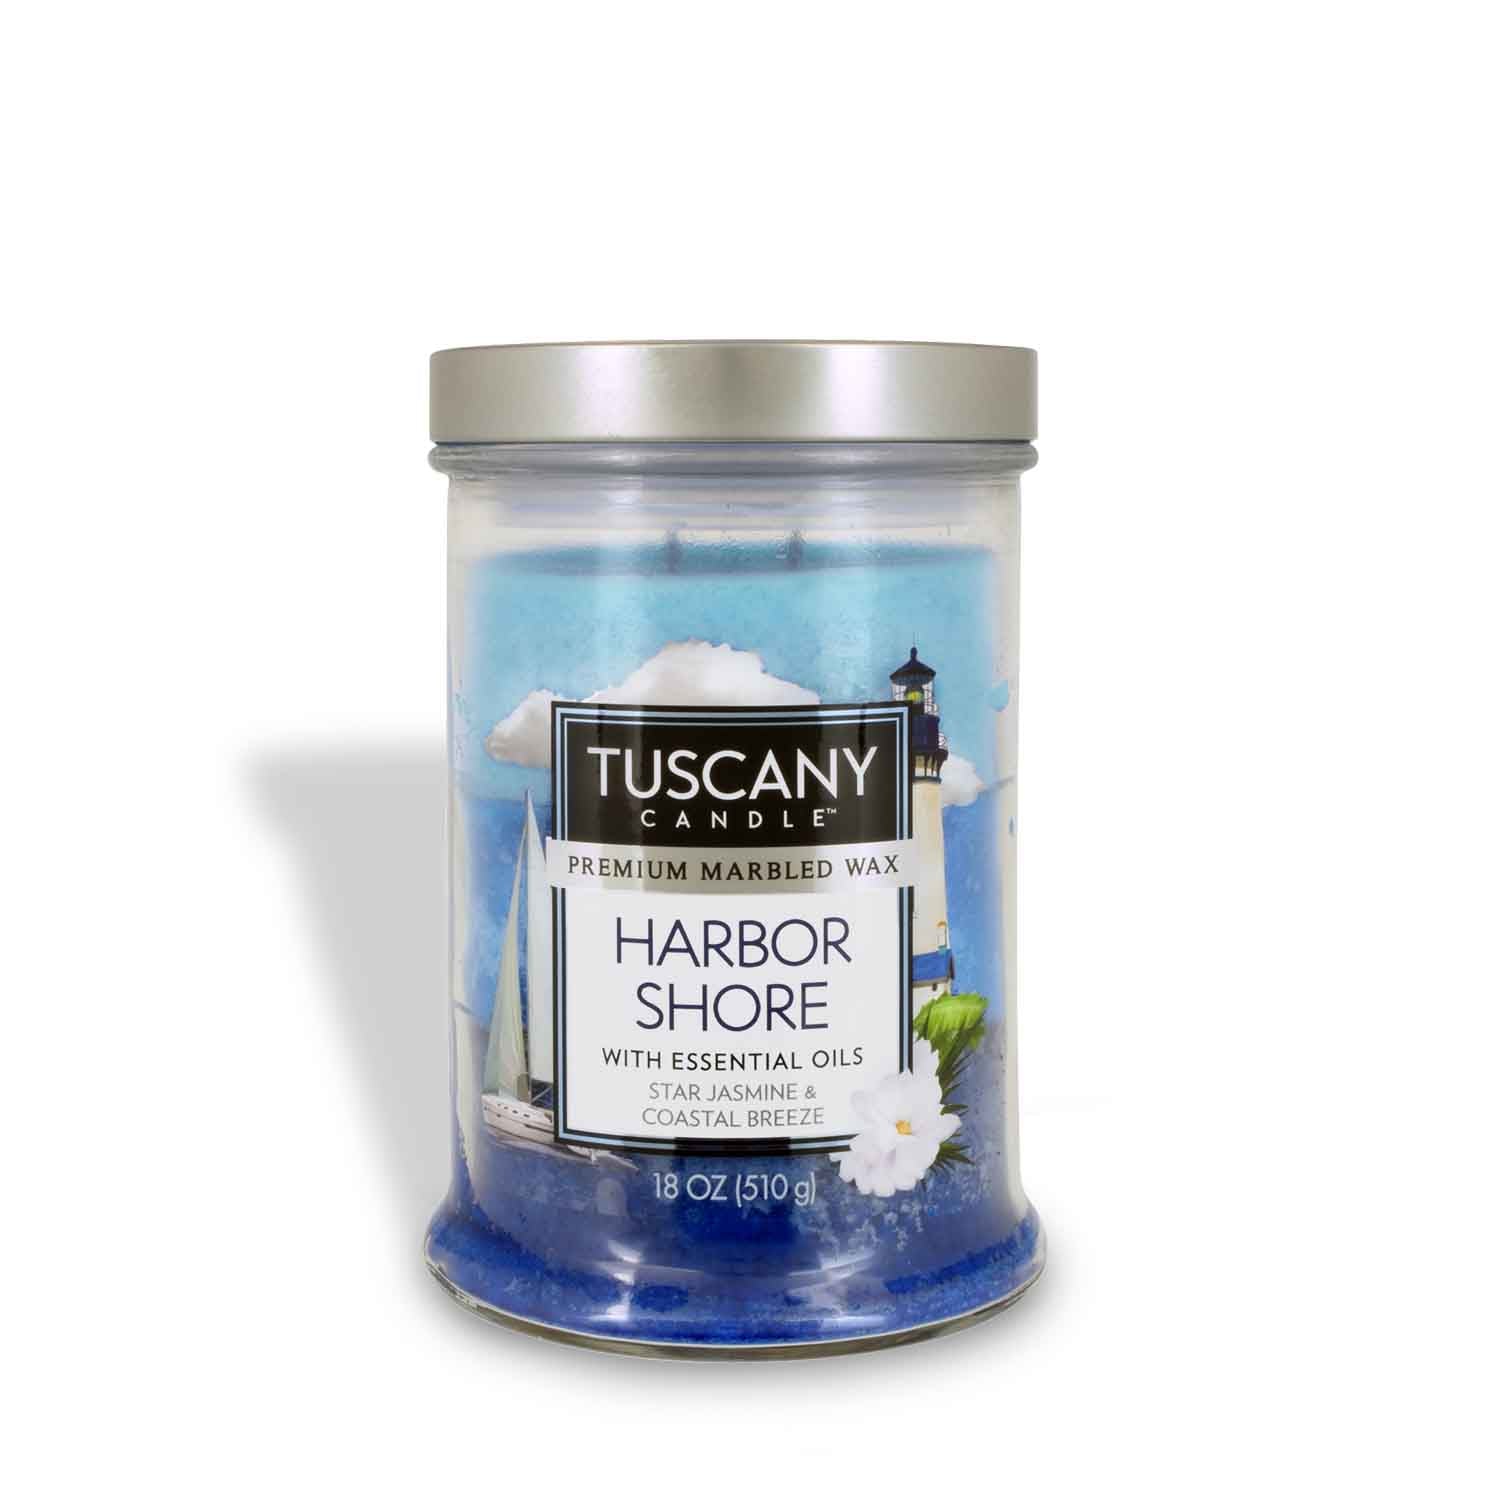 Tuscany Candle® EVD Tuscany Candle® Premium Marbled Wax Triple Pour (18 oz) - Harbor Shore jar candle featuring fragrance and essential oils.